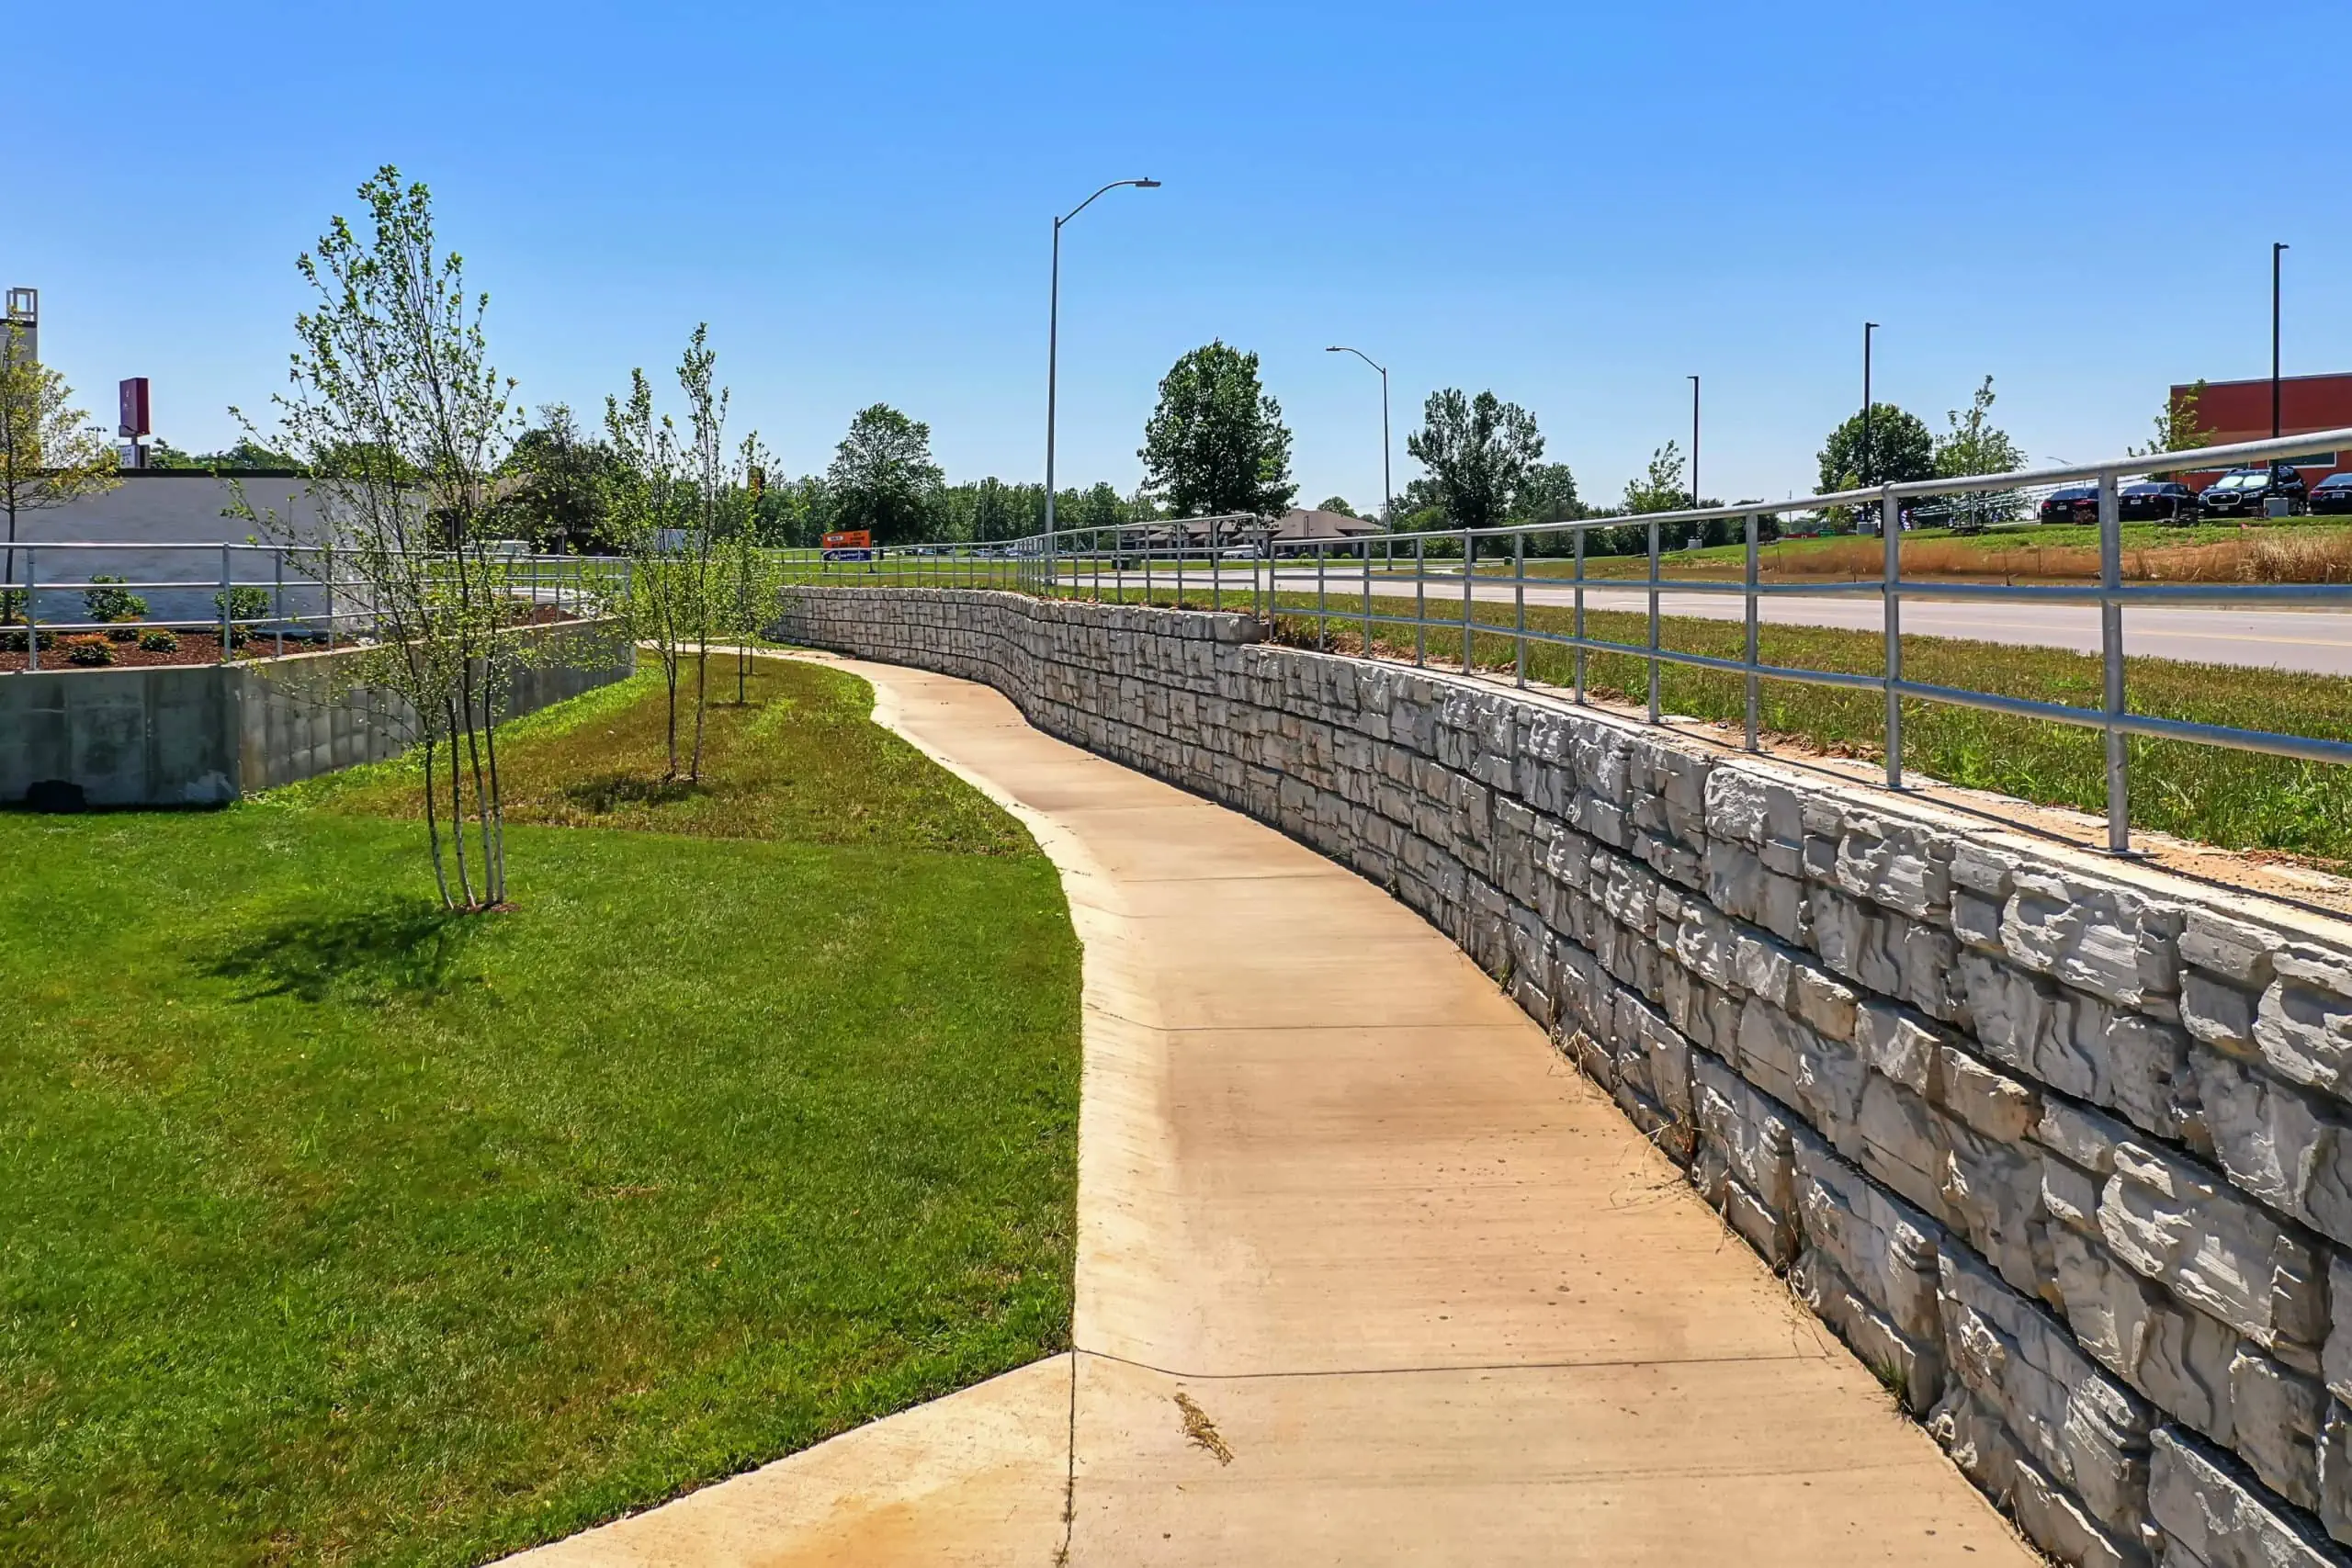 Big block retaining wall for stormwater conveyance.